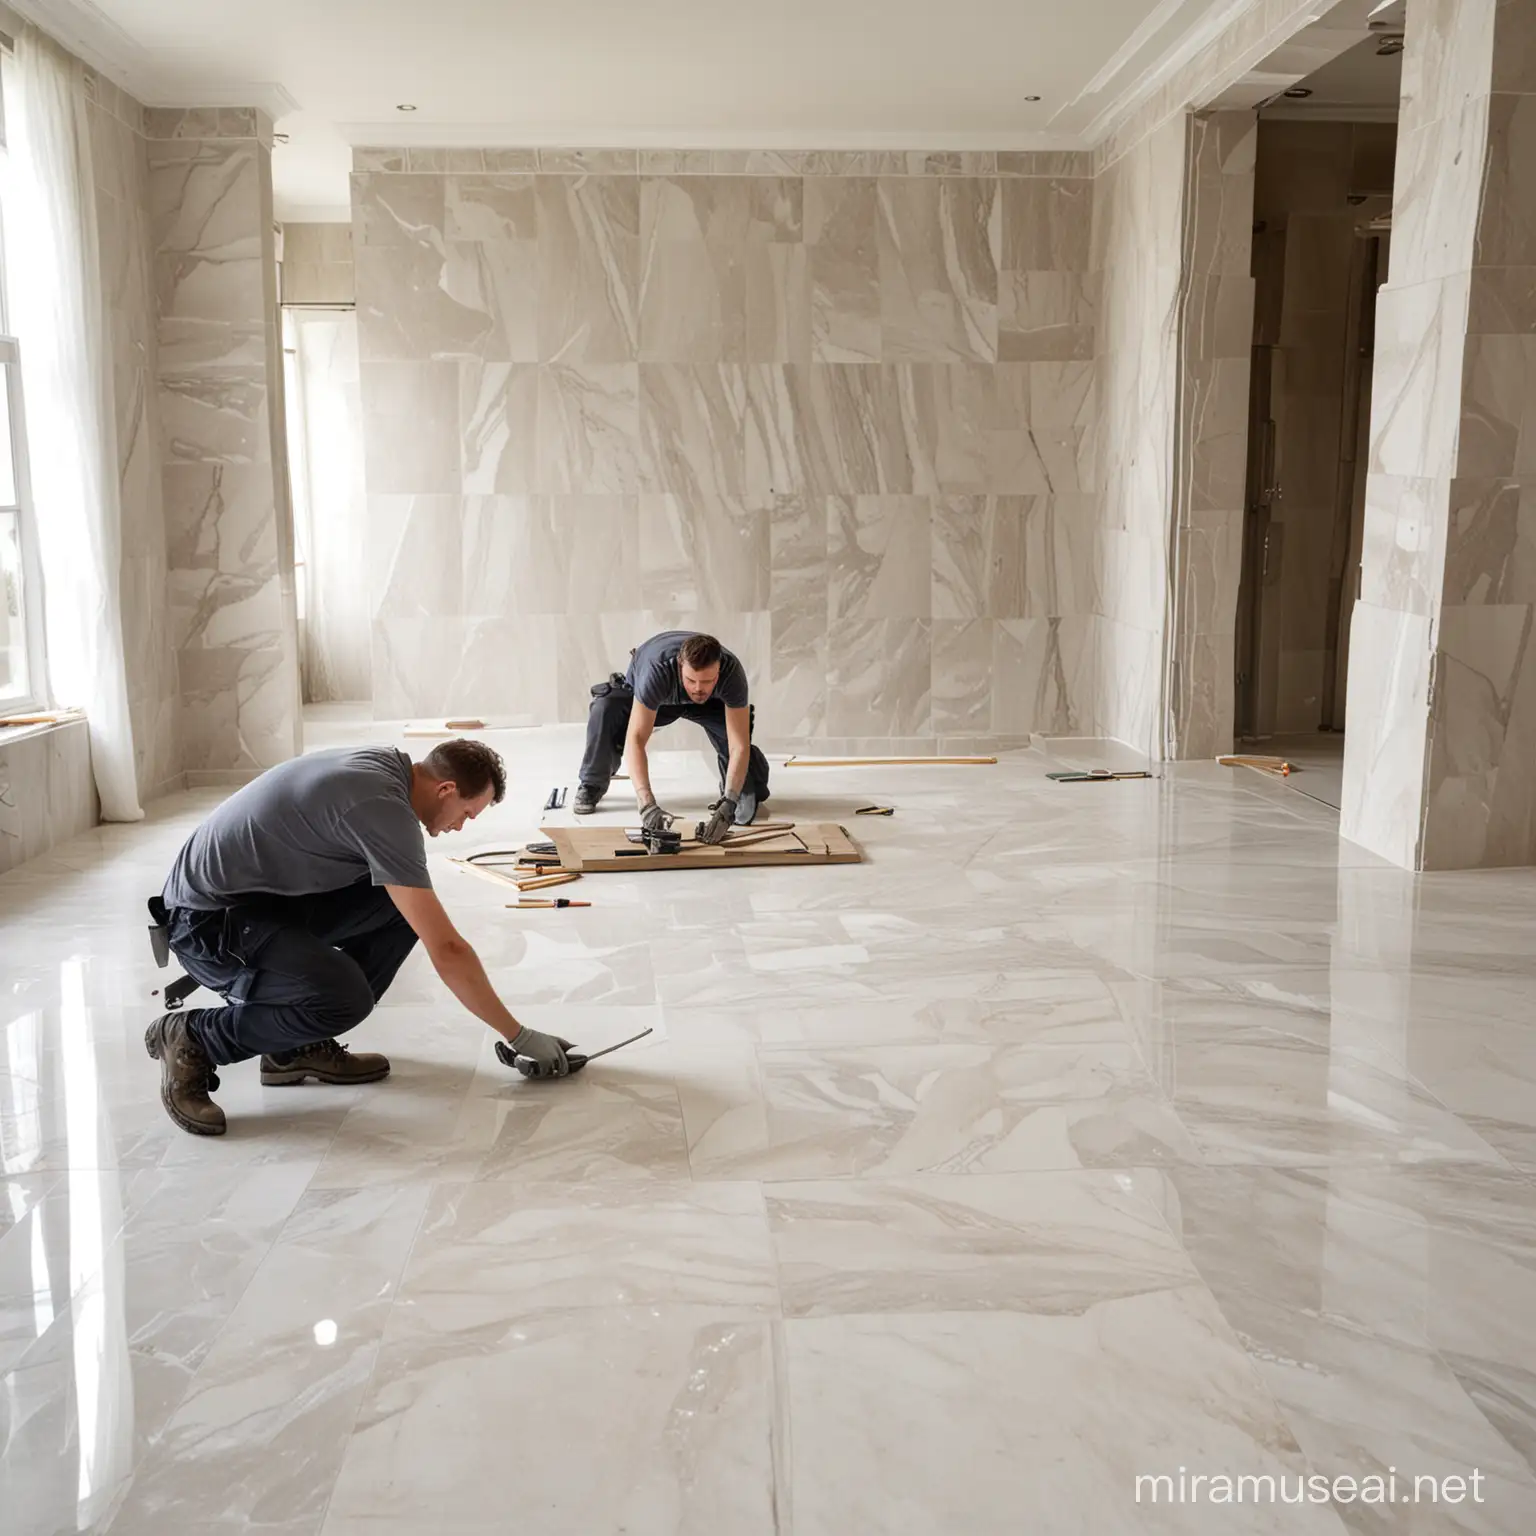 Skilled Workers Laying Marble in Luxurious Bathroom